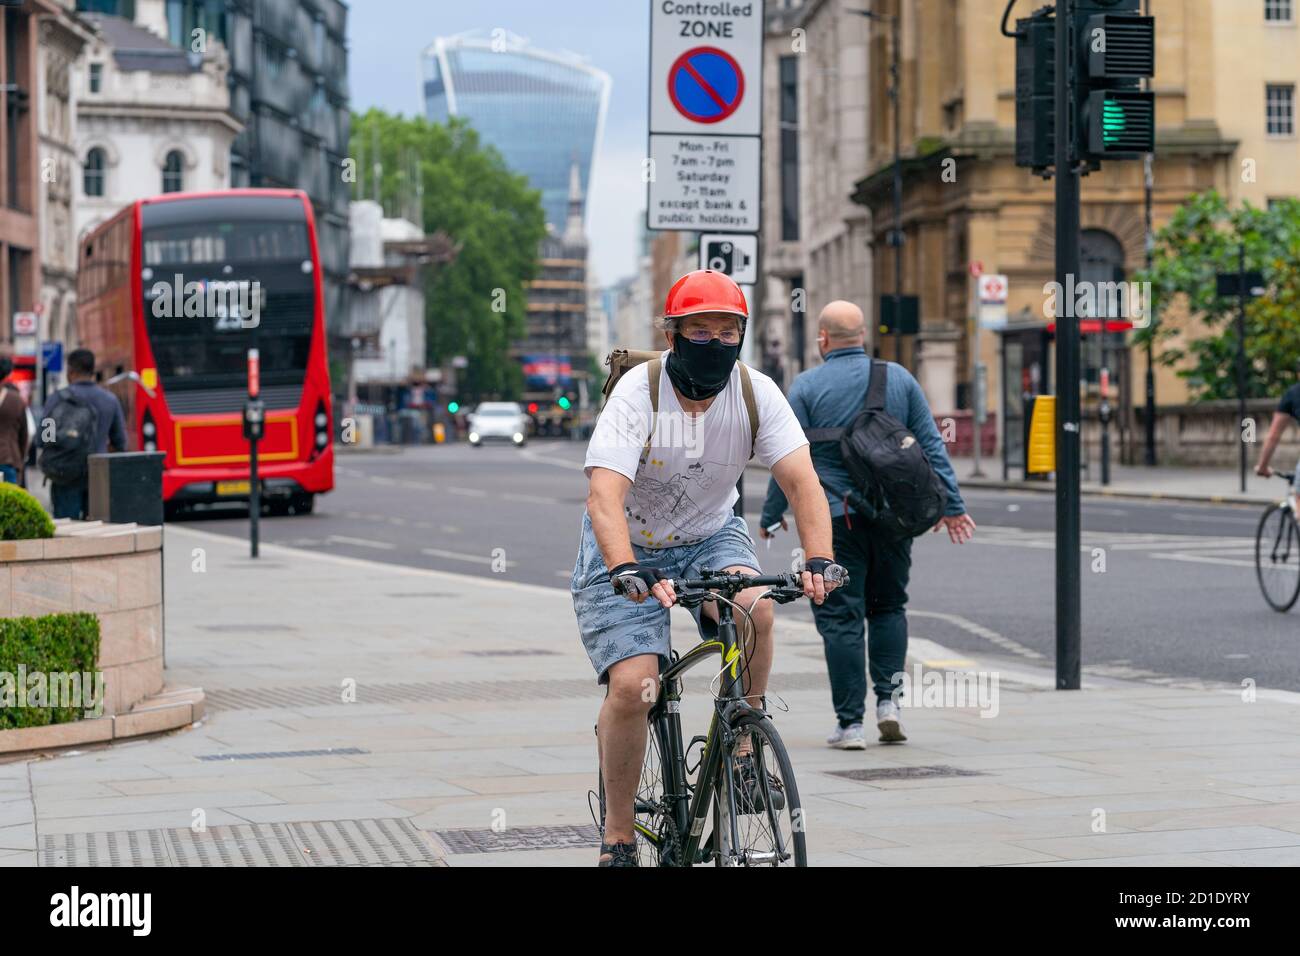 LONDON, ENGLAND - JUNE 3, 2020: Elderly male cyclist riding a bicycle in Holborn London wearing a face mask, glasses and crash helmet during the COVID Stock Photo